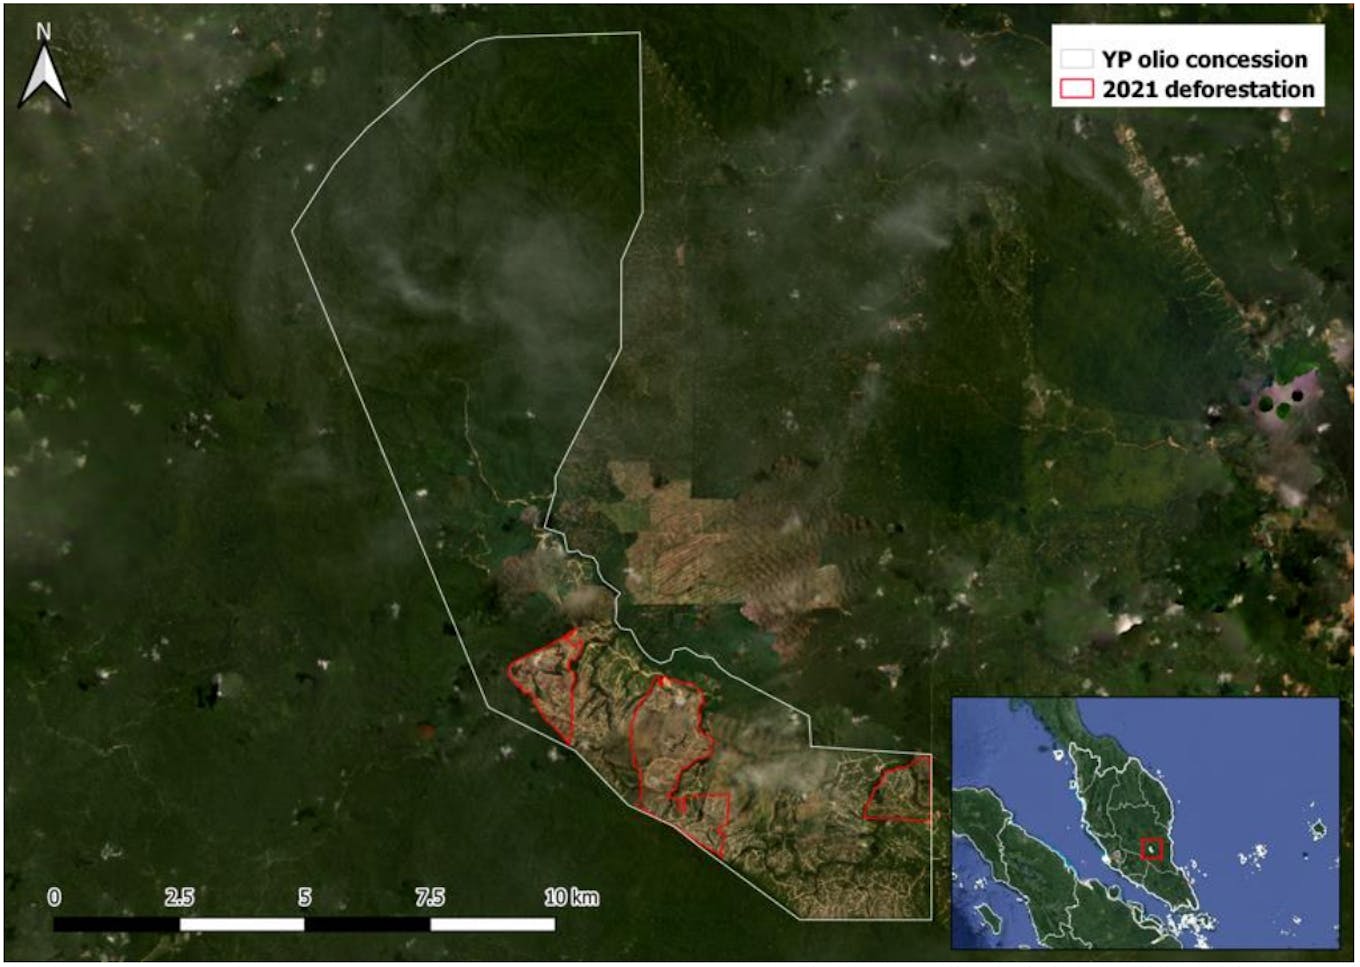 Deforestation in YP Olio's concession in 2021. Image: Chain Reaction Research